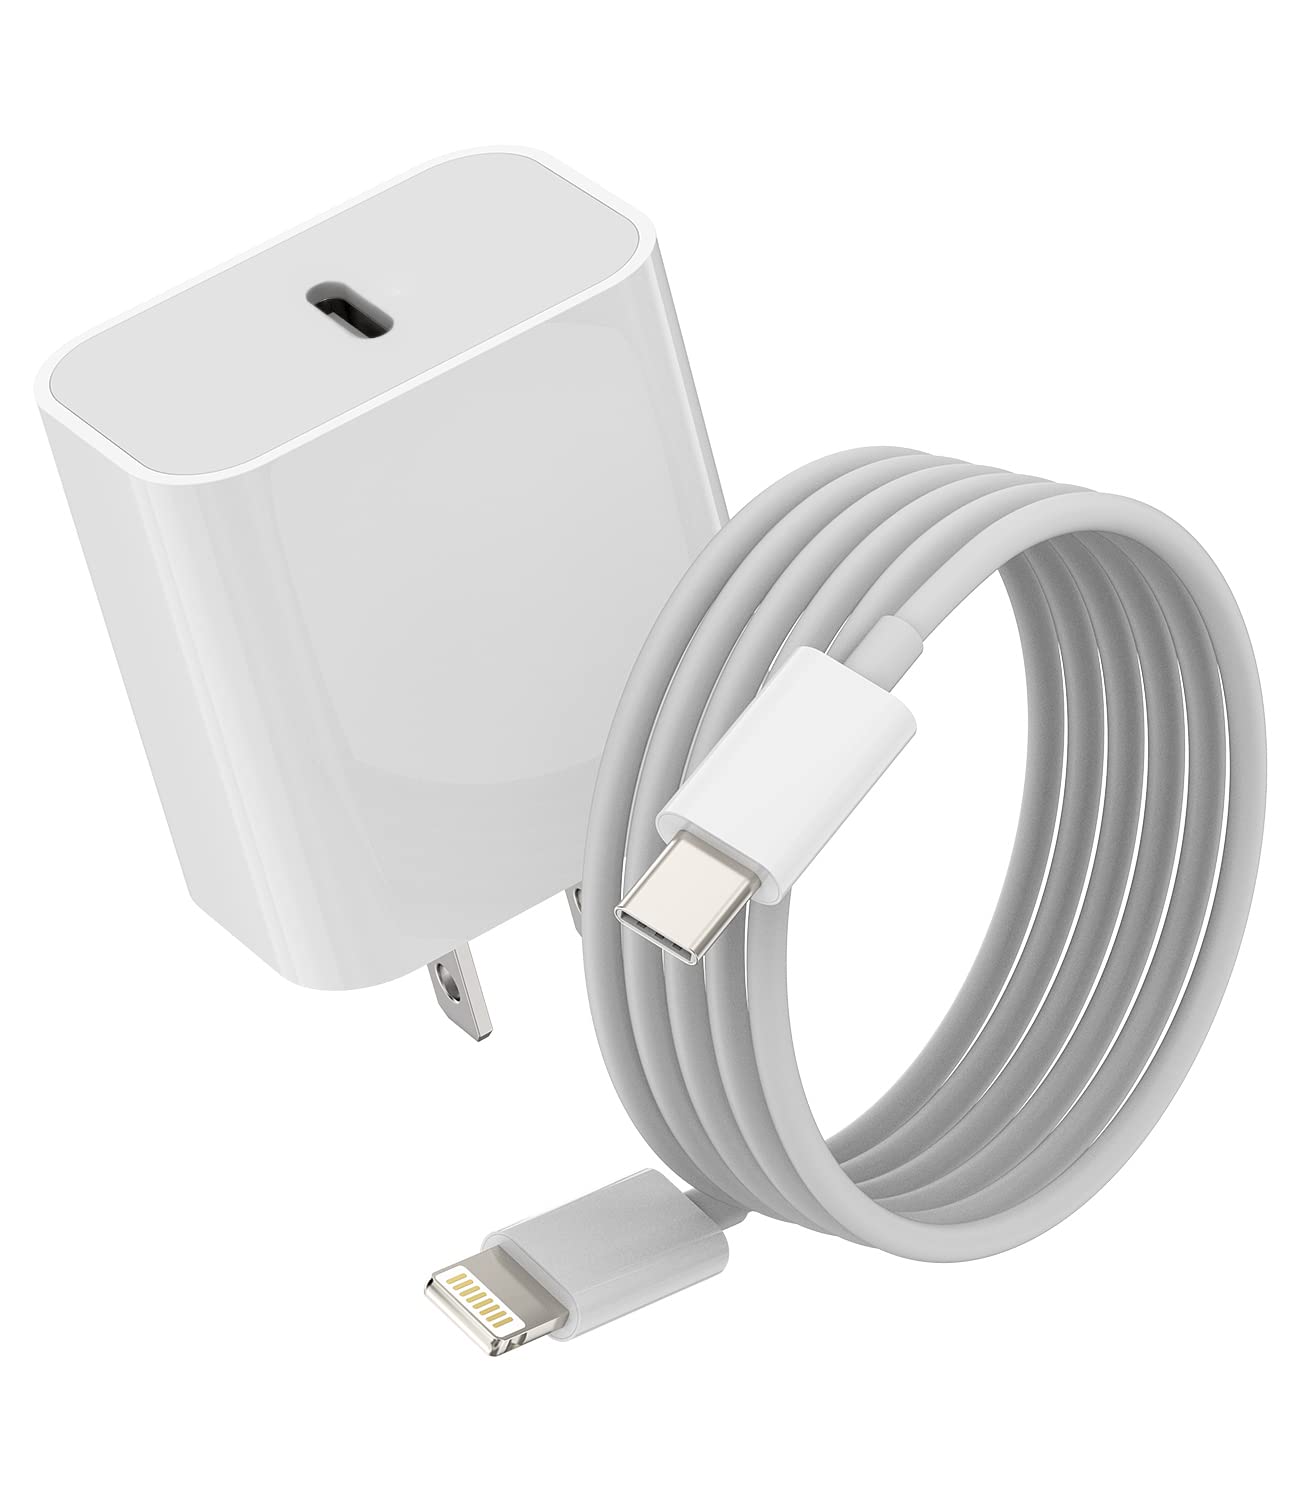 Lightning Type C Cable + Wall Adapter - White